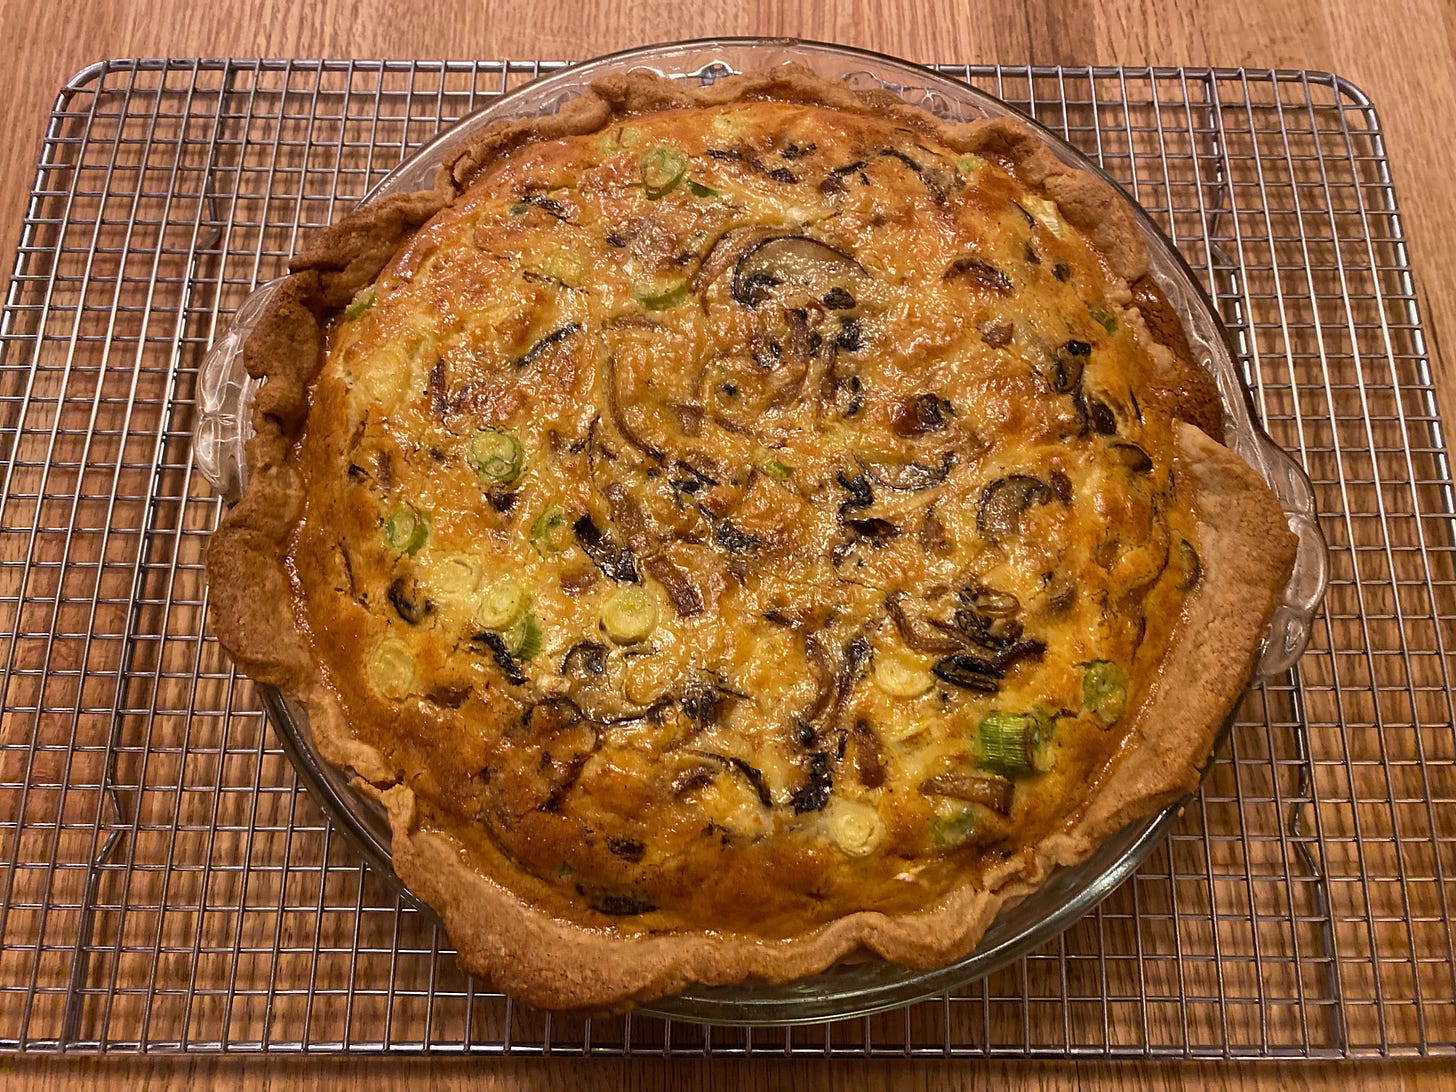 A golden brown mushroom quiche on a metal cooling rack on a kitchen counter.